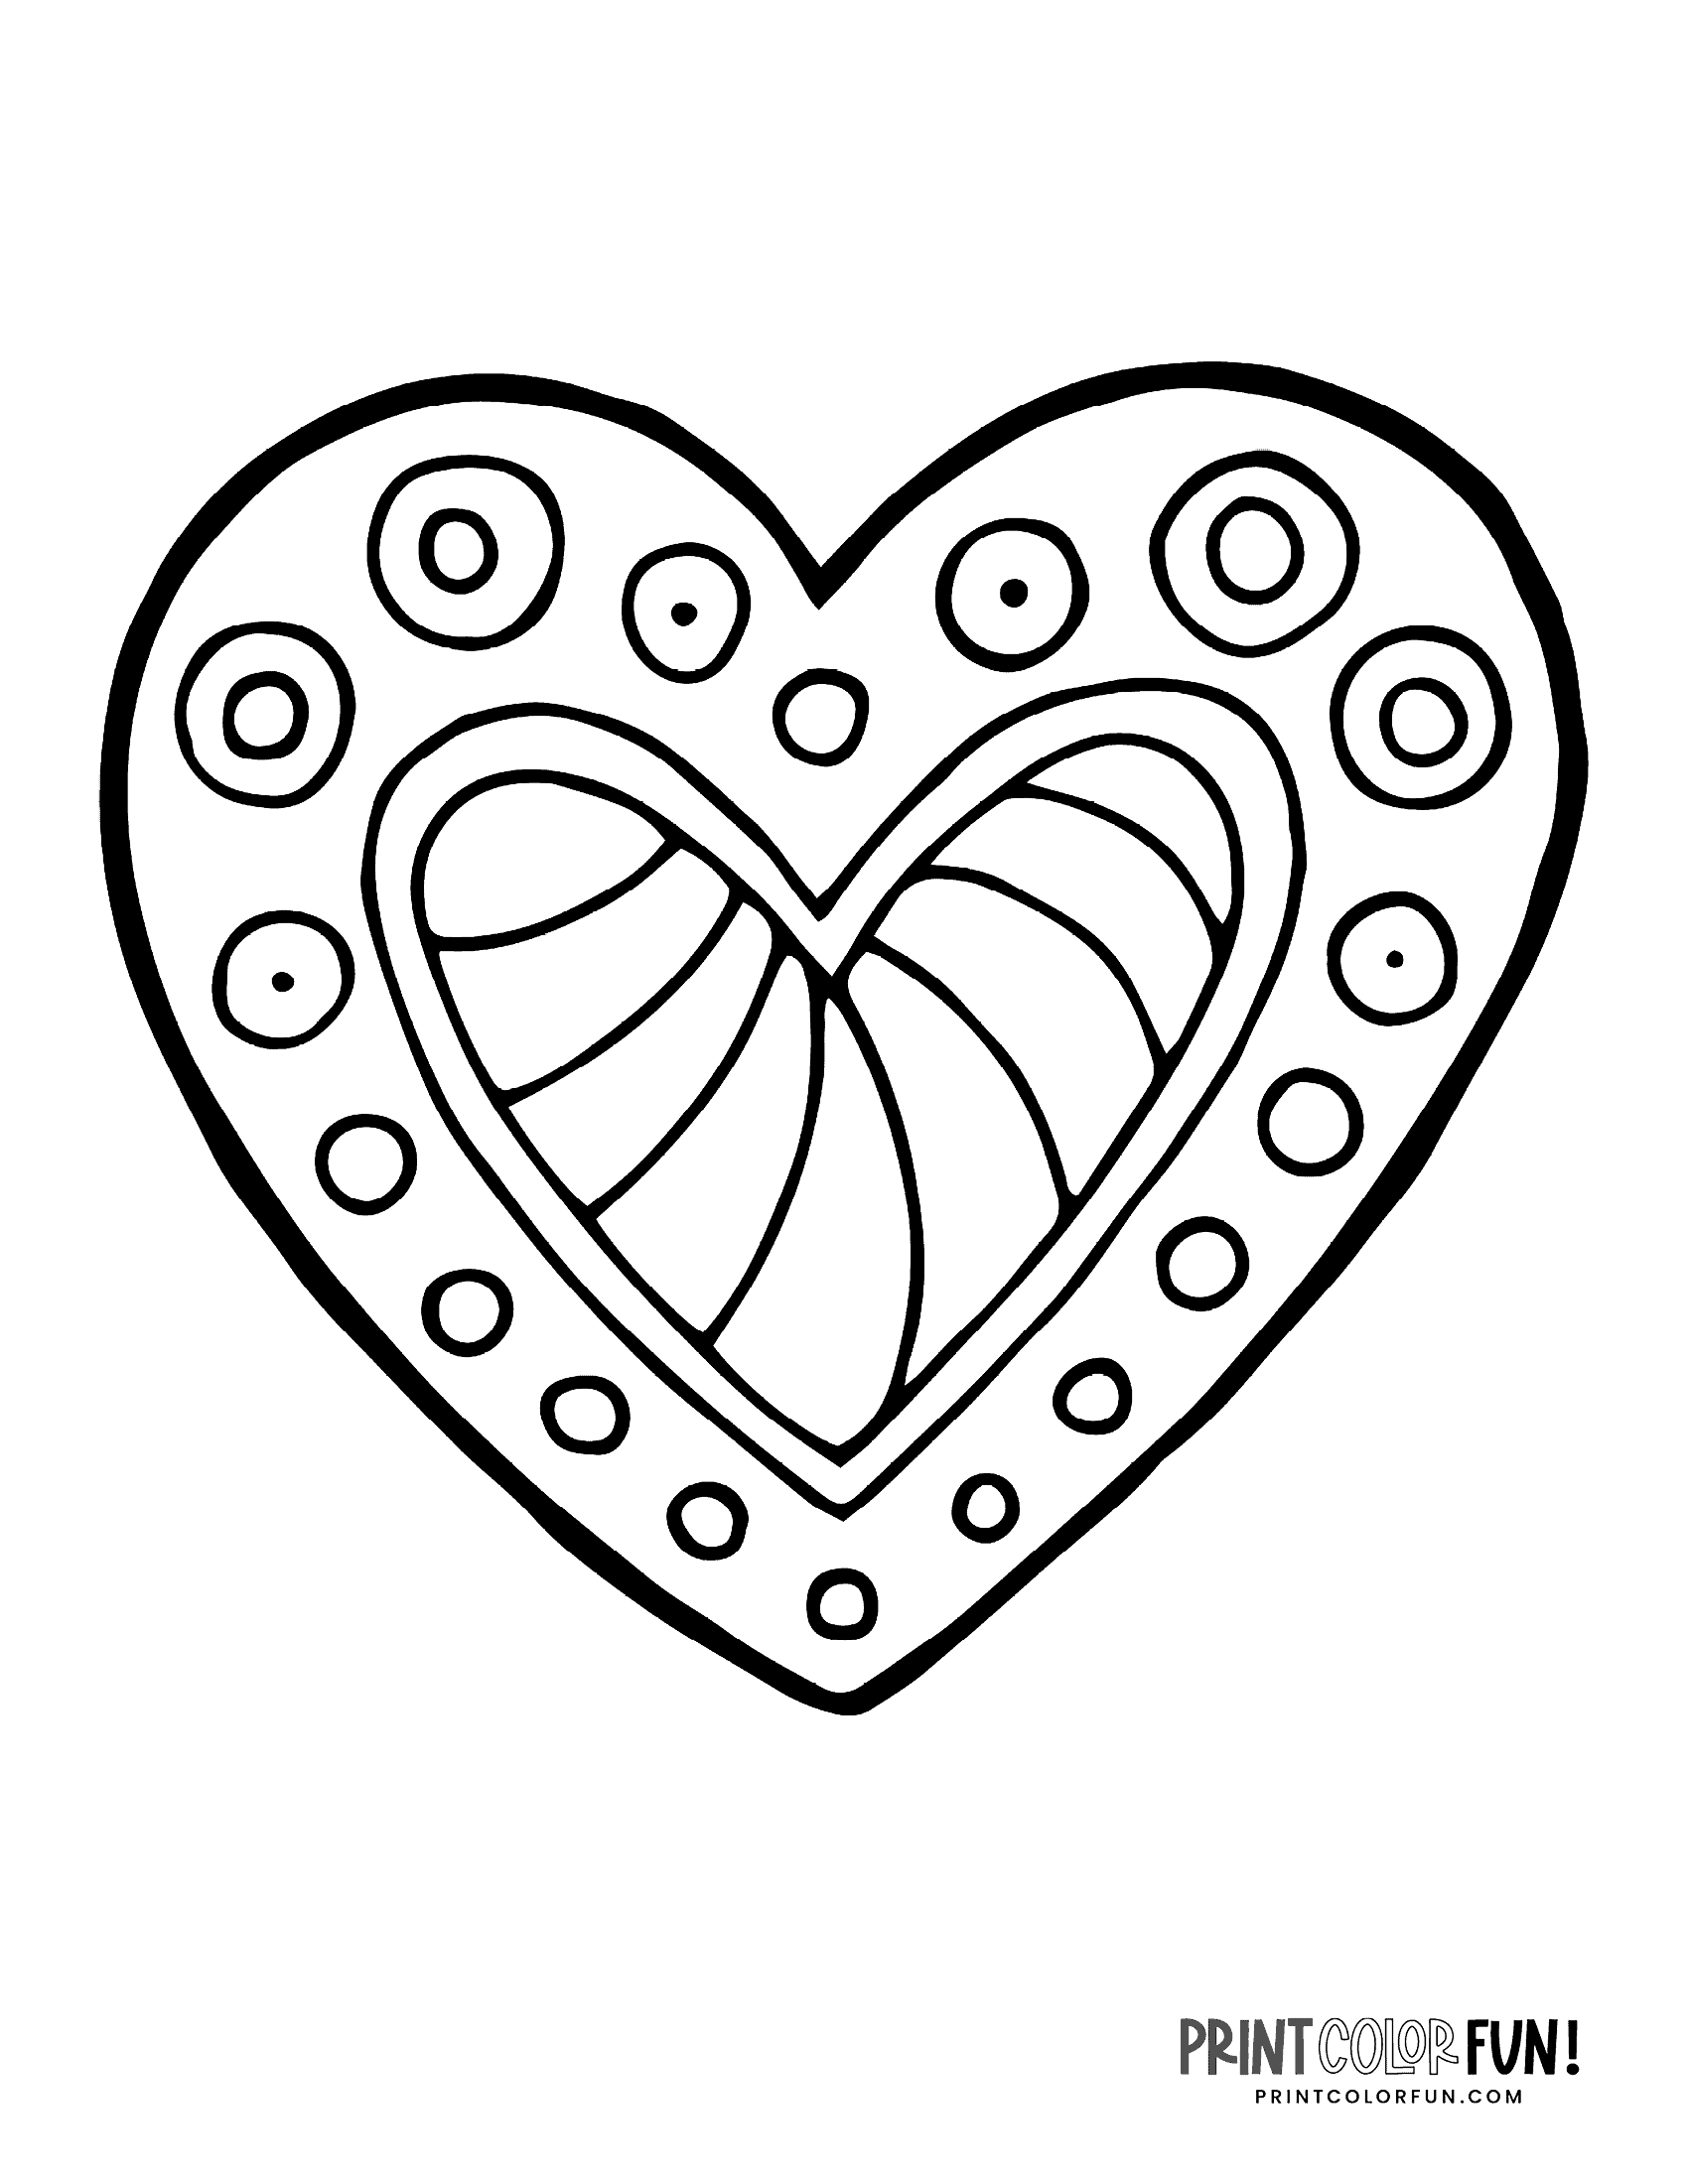 Rainbow Heart Coloring Pages For Adults Coloring Pages